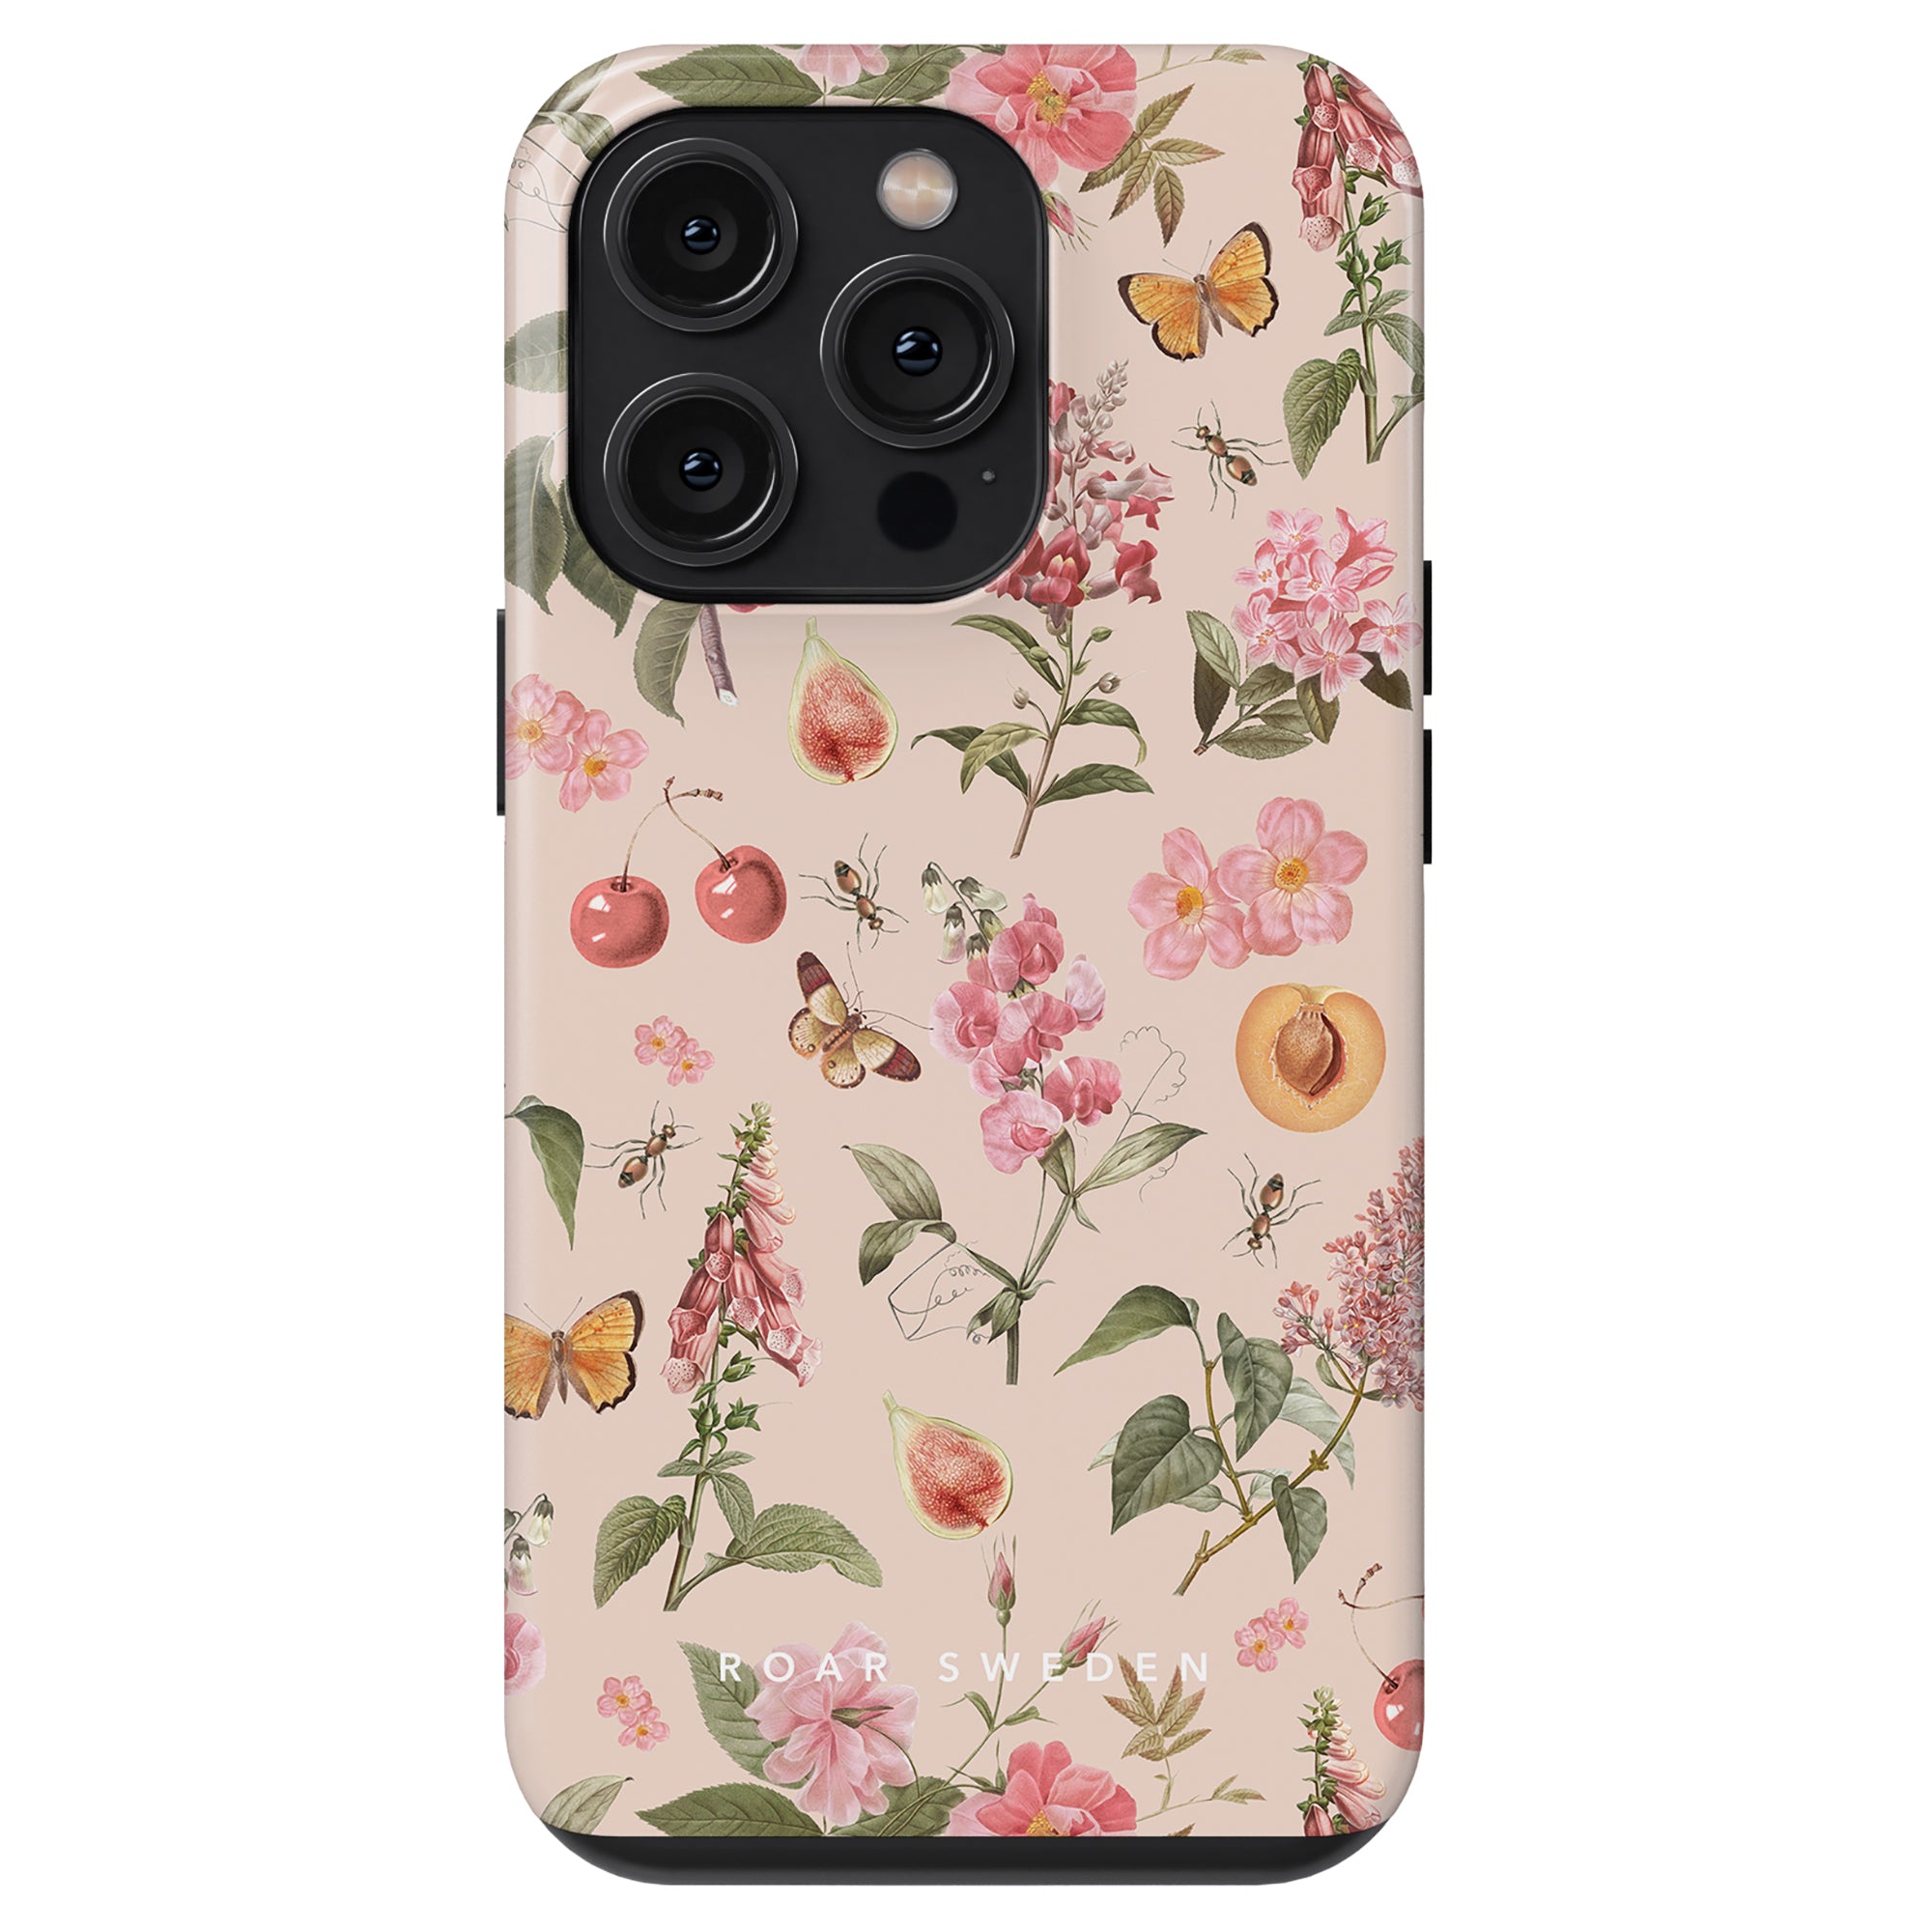 Romantic Spring - Tough Case designed for a camera-equipped smartphone, evoking the essence of Romantic Spring.